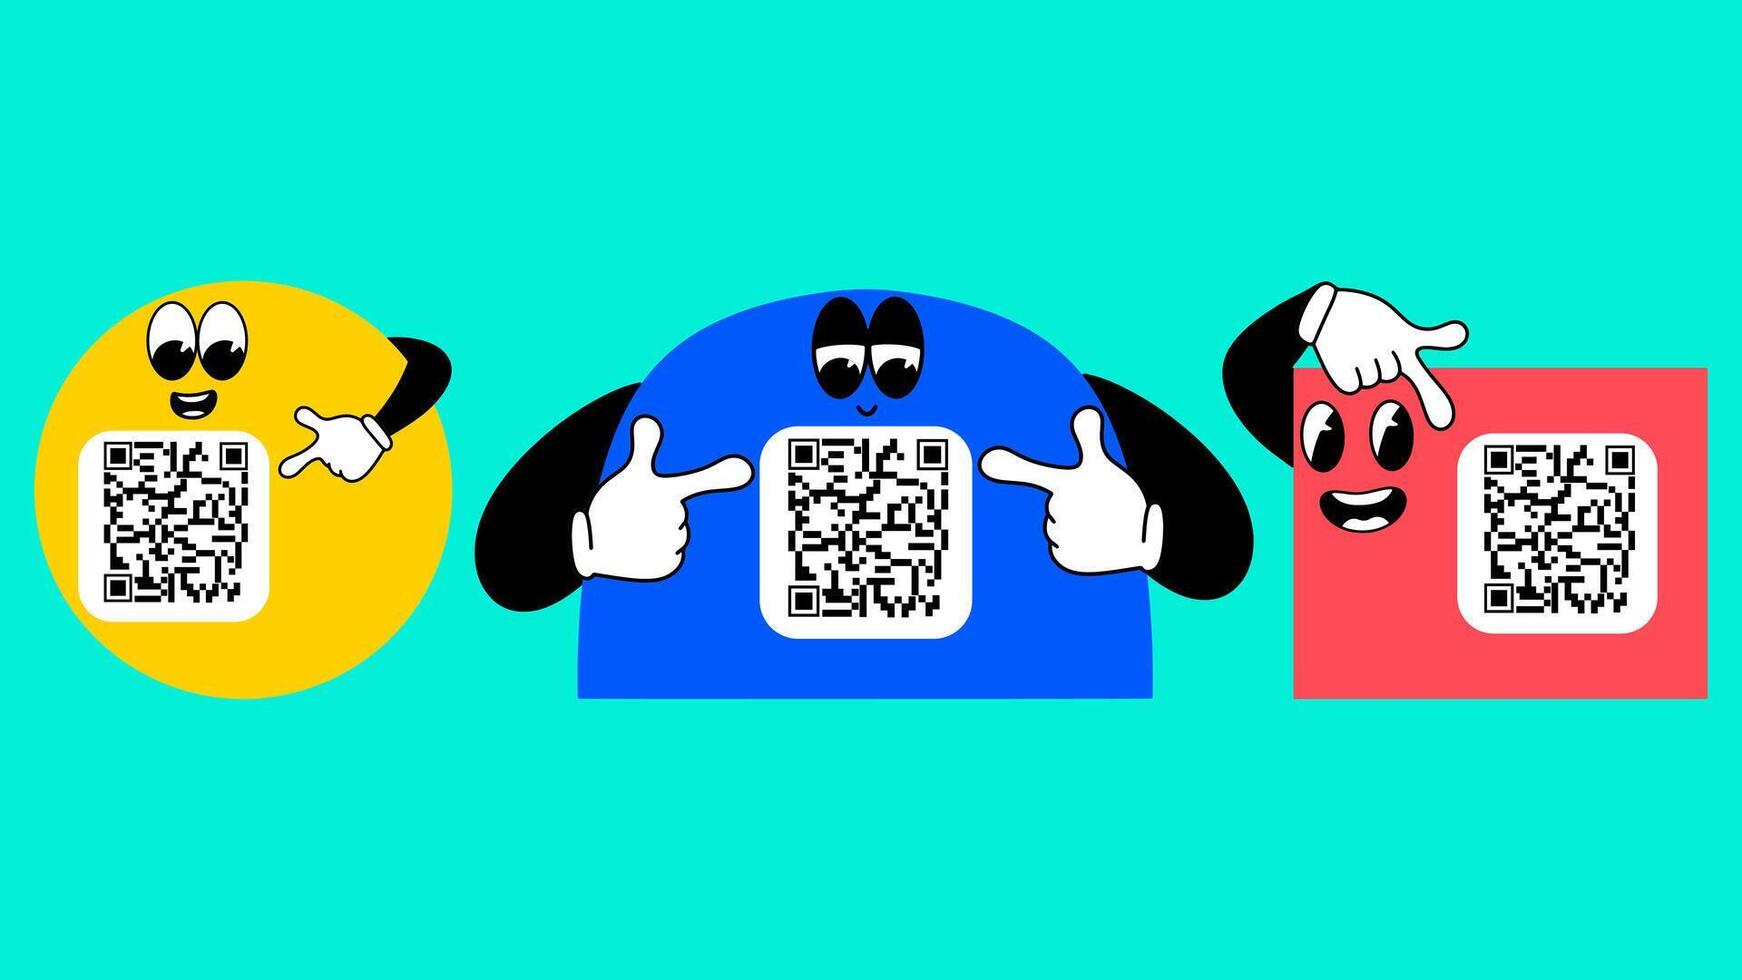 Cartoon character frames with space to add a QR code scan set. Vector illustration.